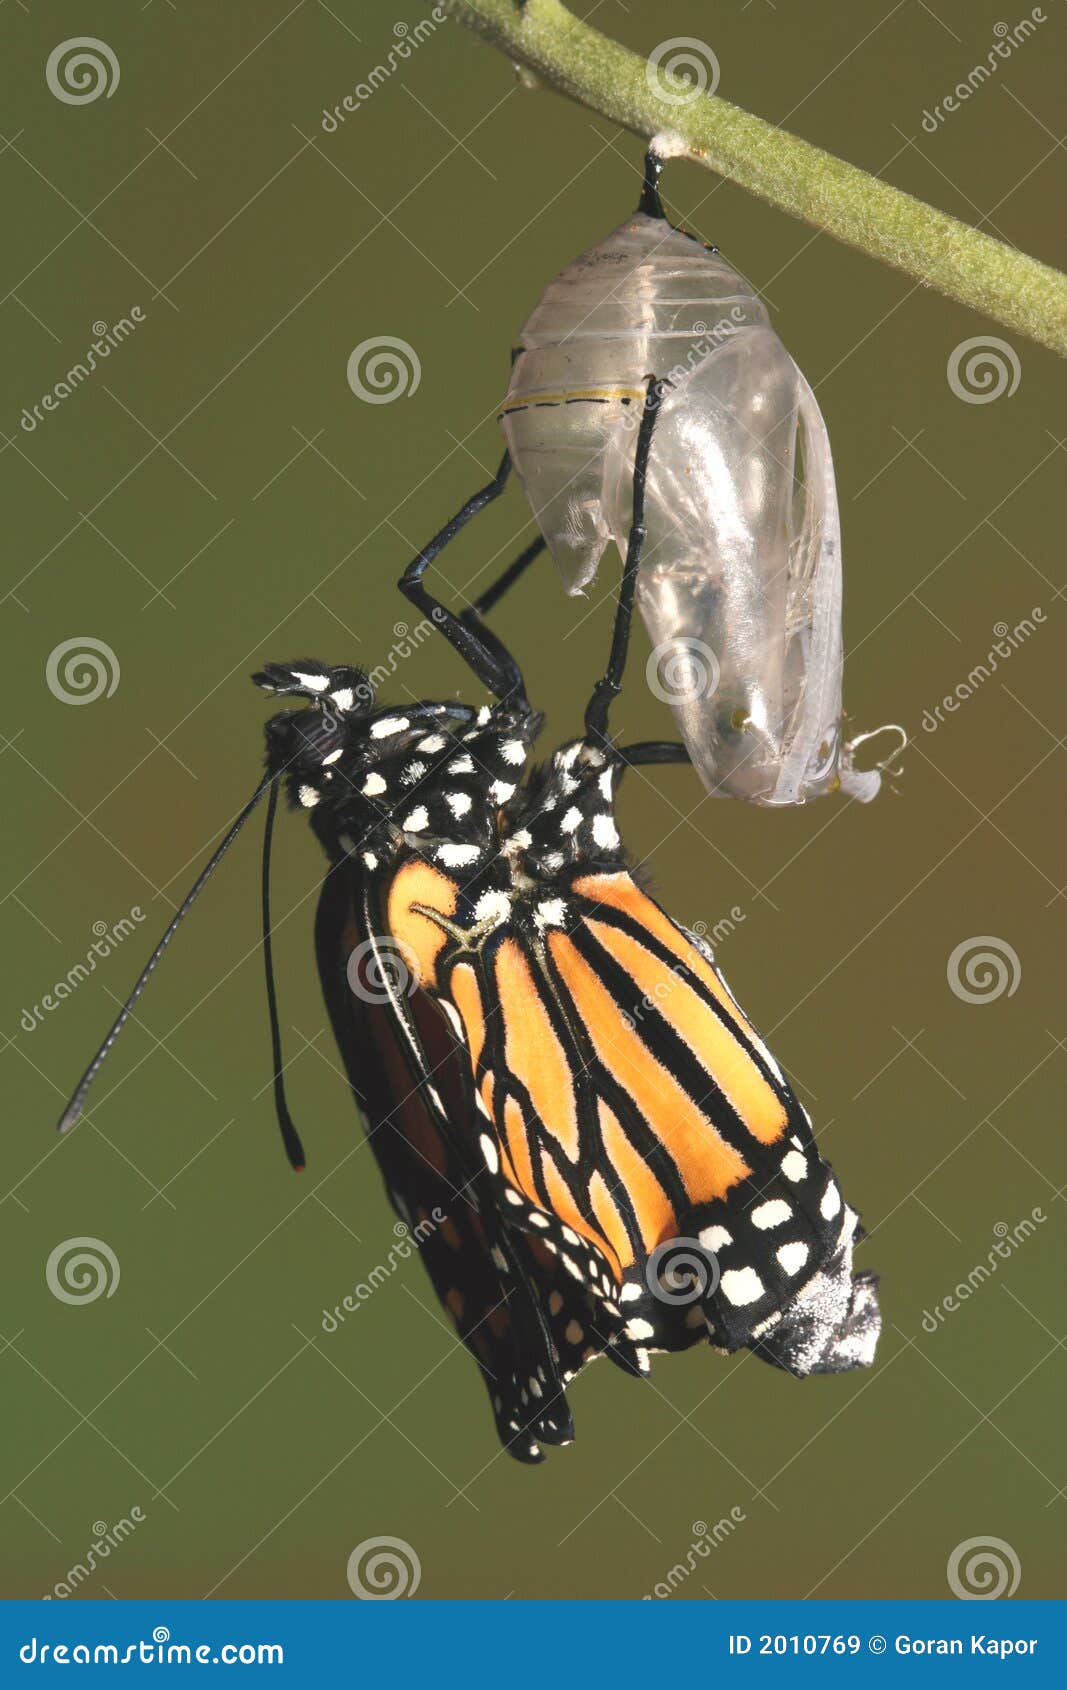 monarch butterfly emerging from its chrysalis